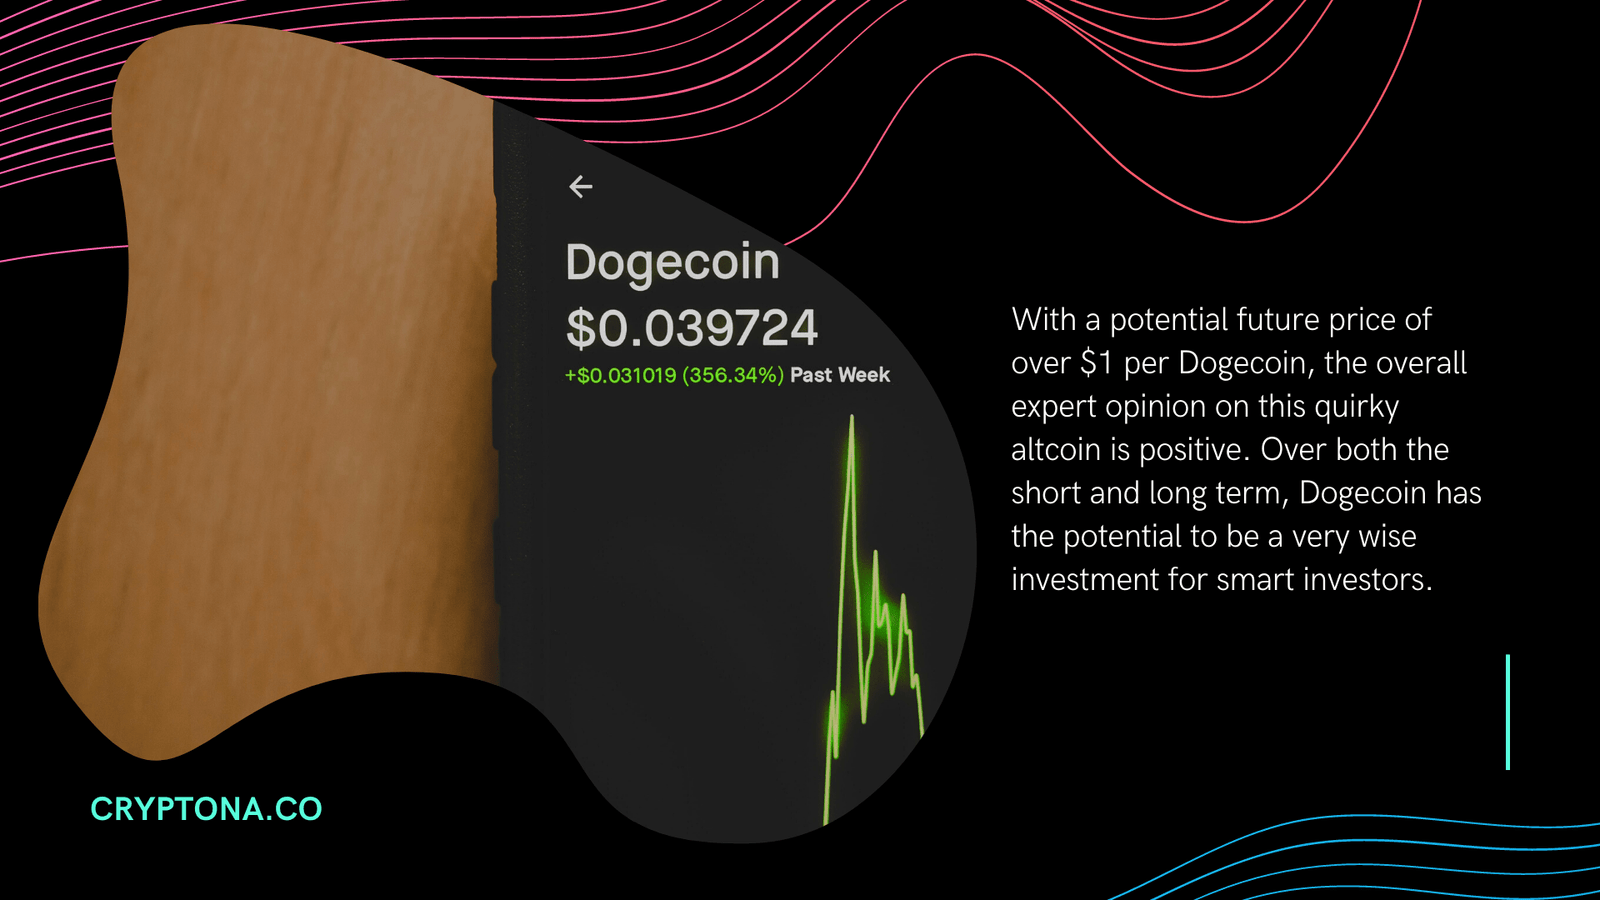 Expert analysis of the Dogecoin price potential